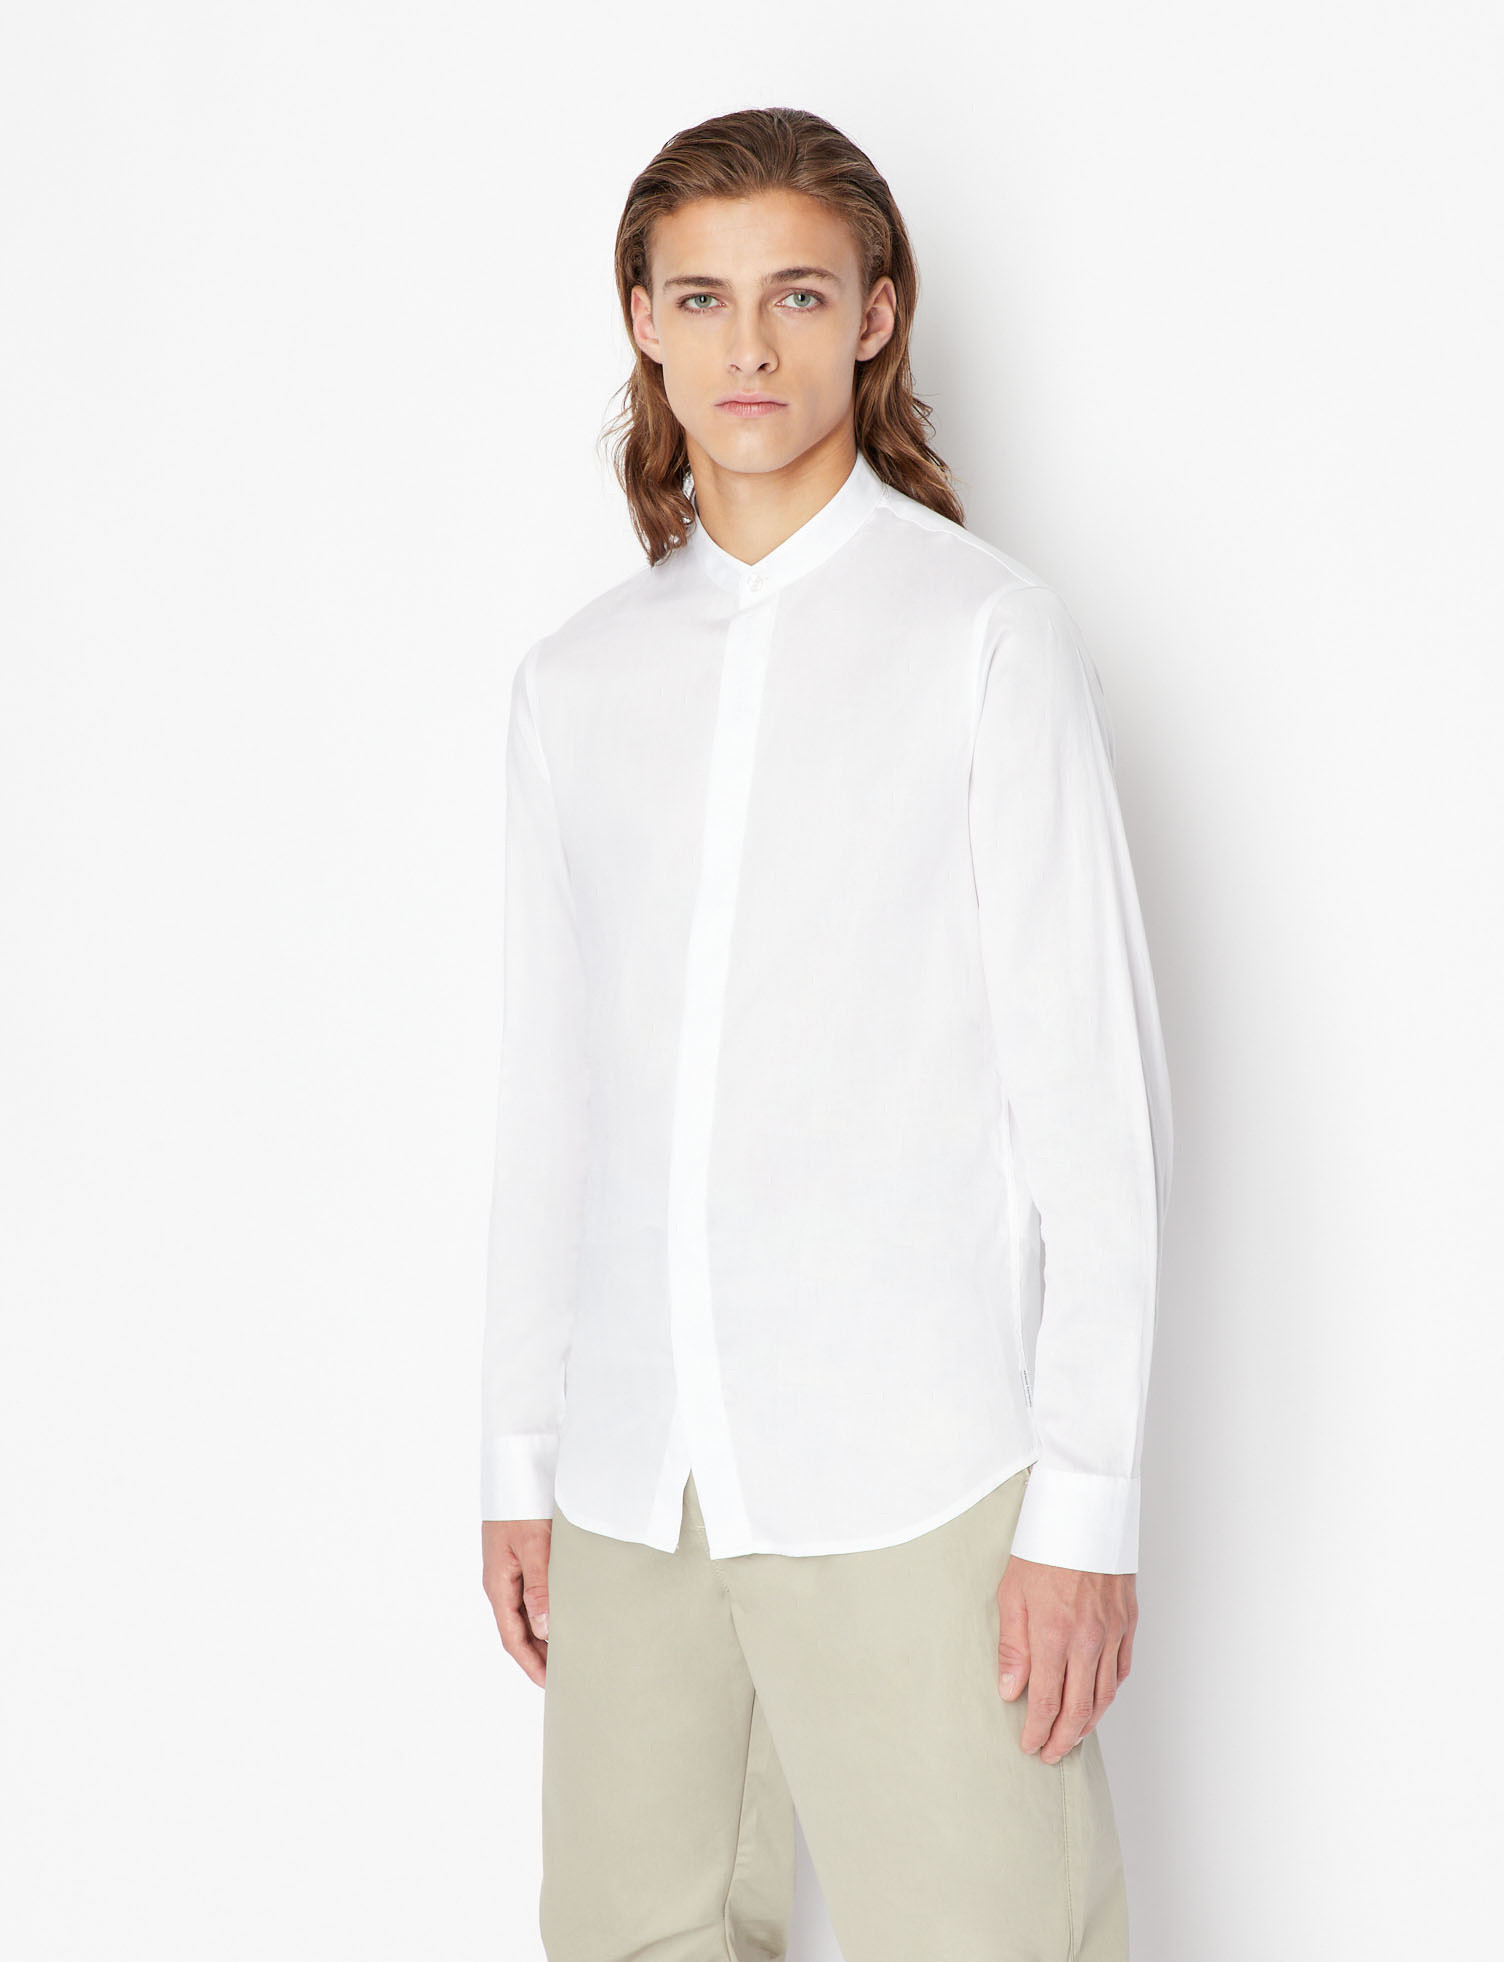 Armani Exchange - Camicia slim fit in cotone, Bianco, large image number 1